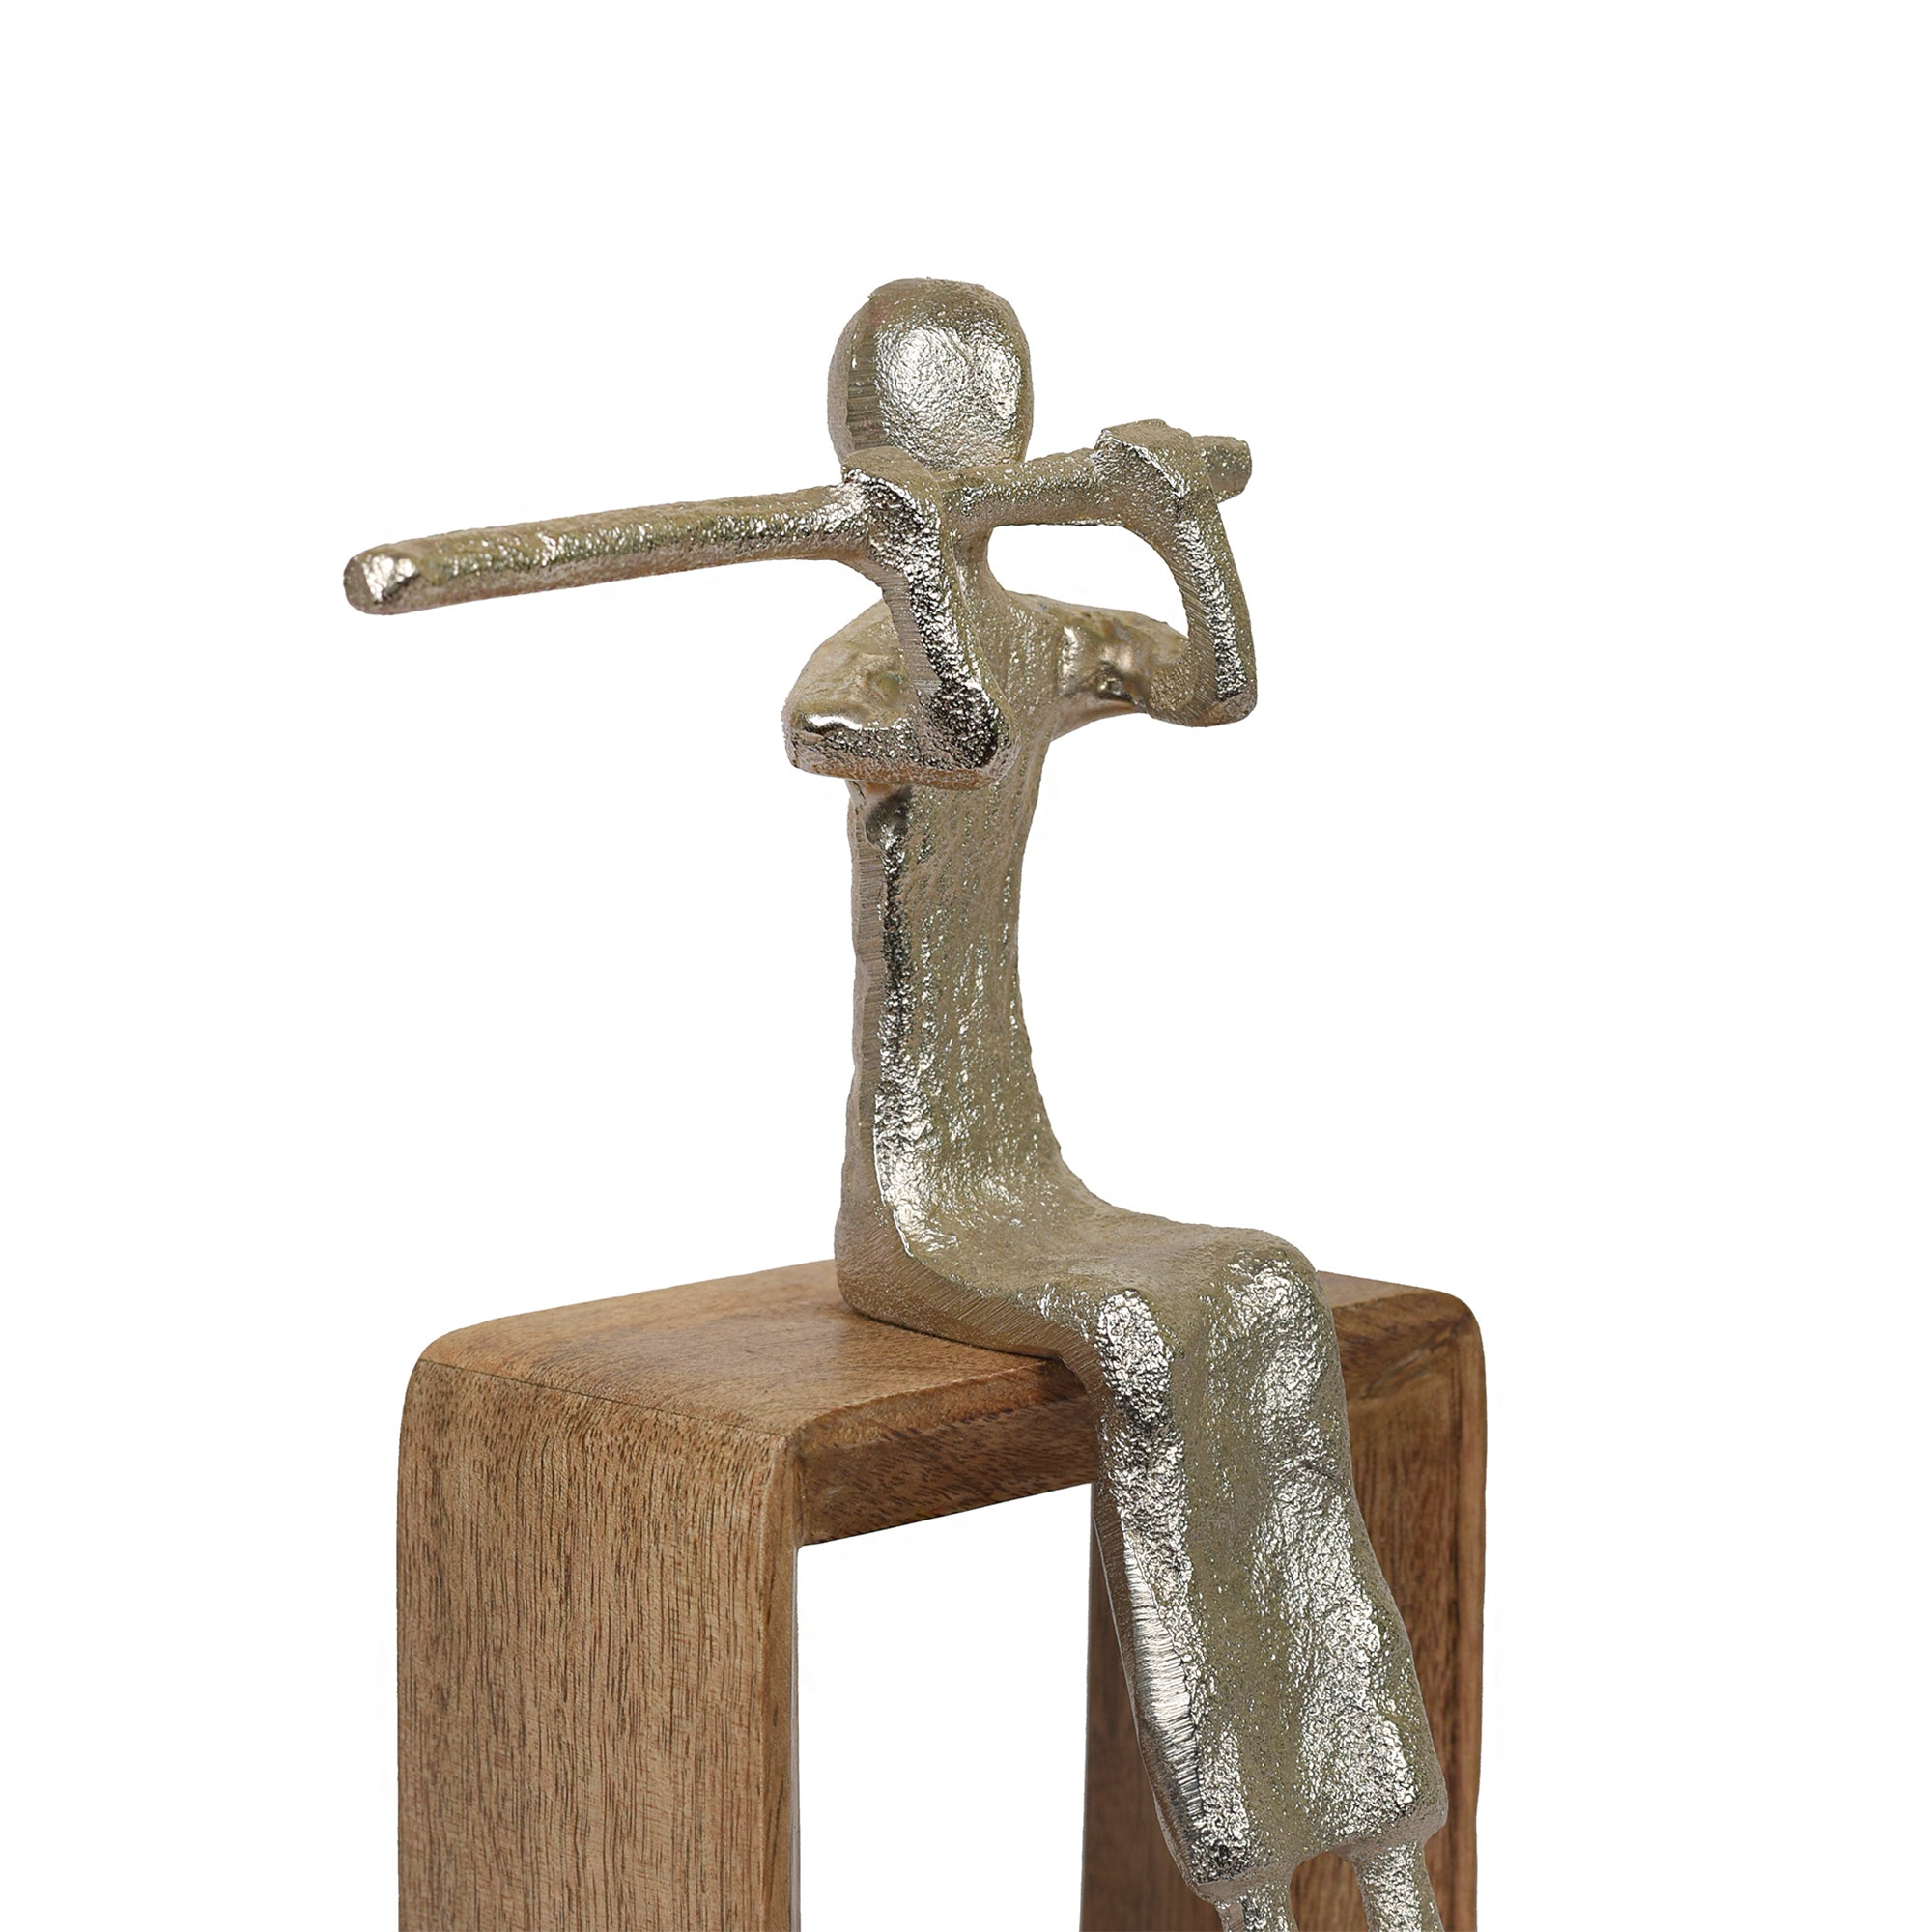 The People Musician Playing Flute Sculpture 9 inches tall